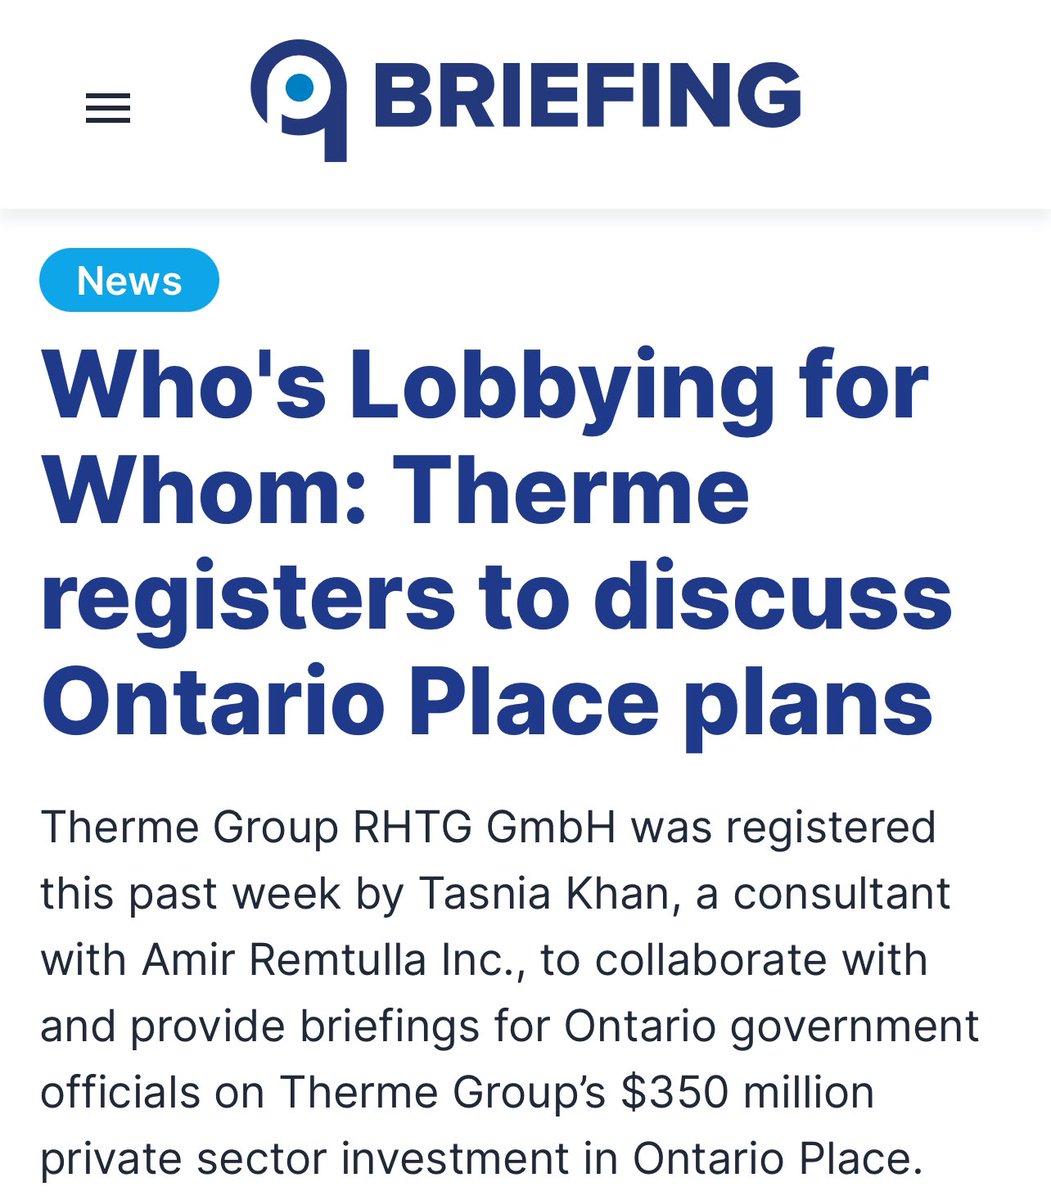 Rob Ford’s ex-chief of staff, lobbying for Therme. It’s a family affair, folks. #onpoli #topoli